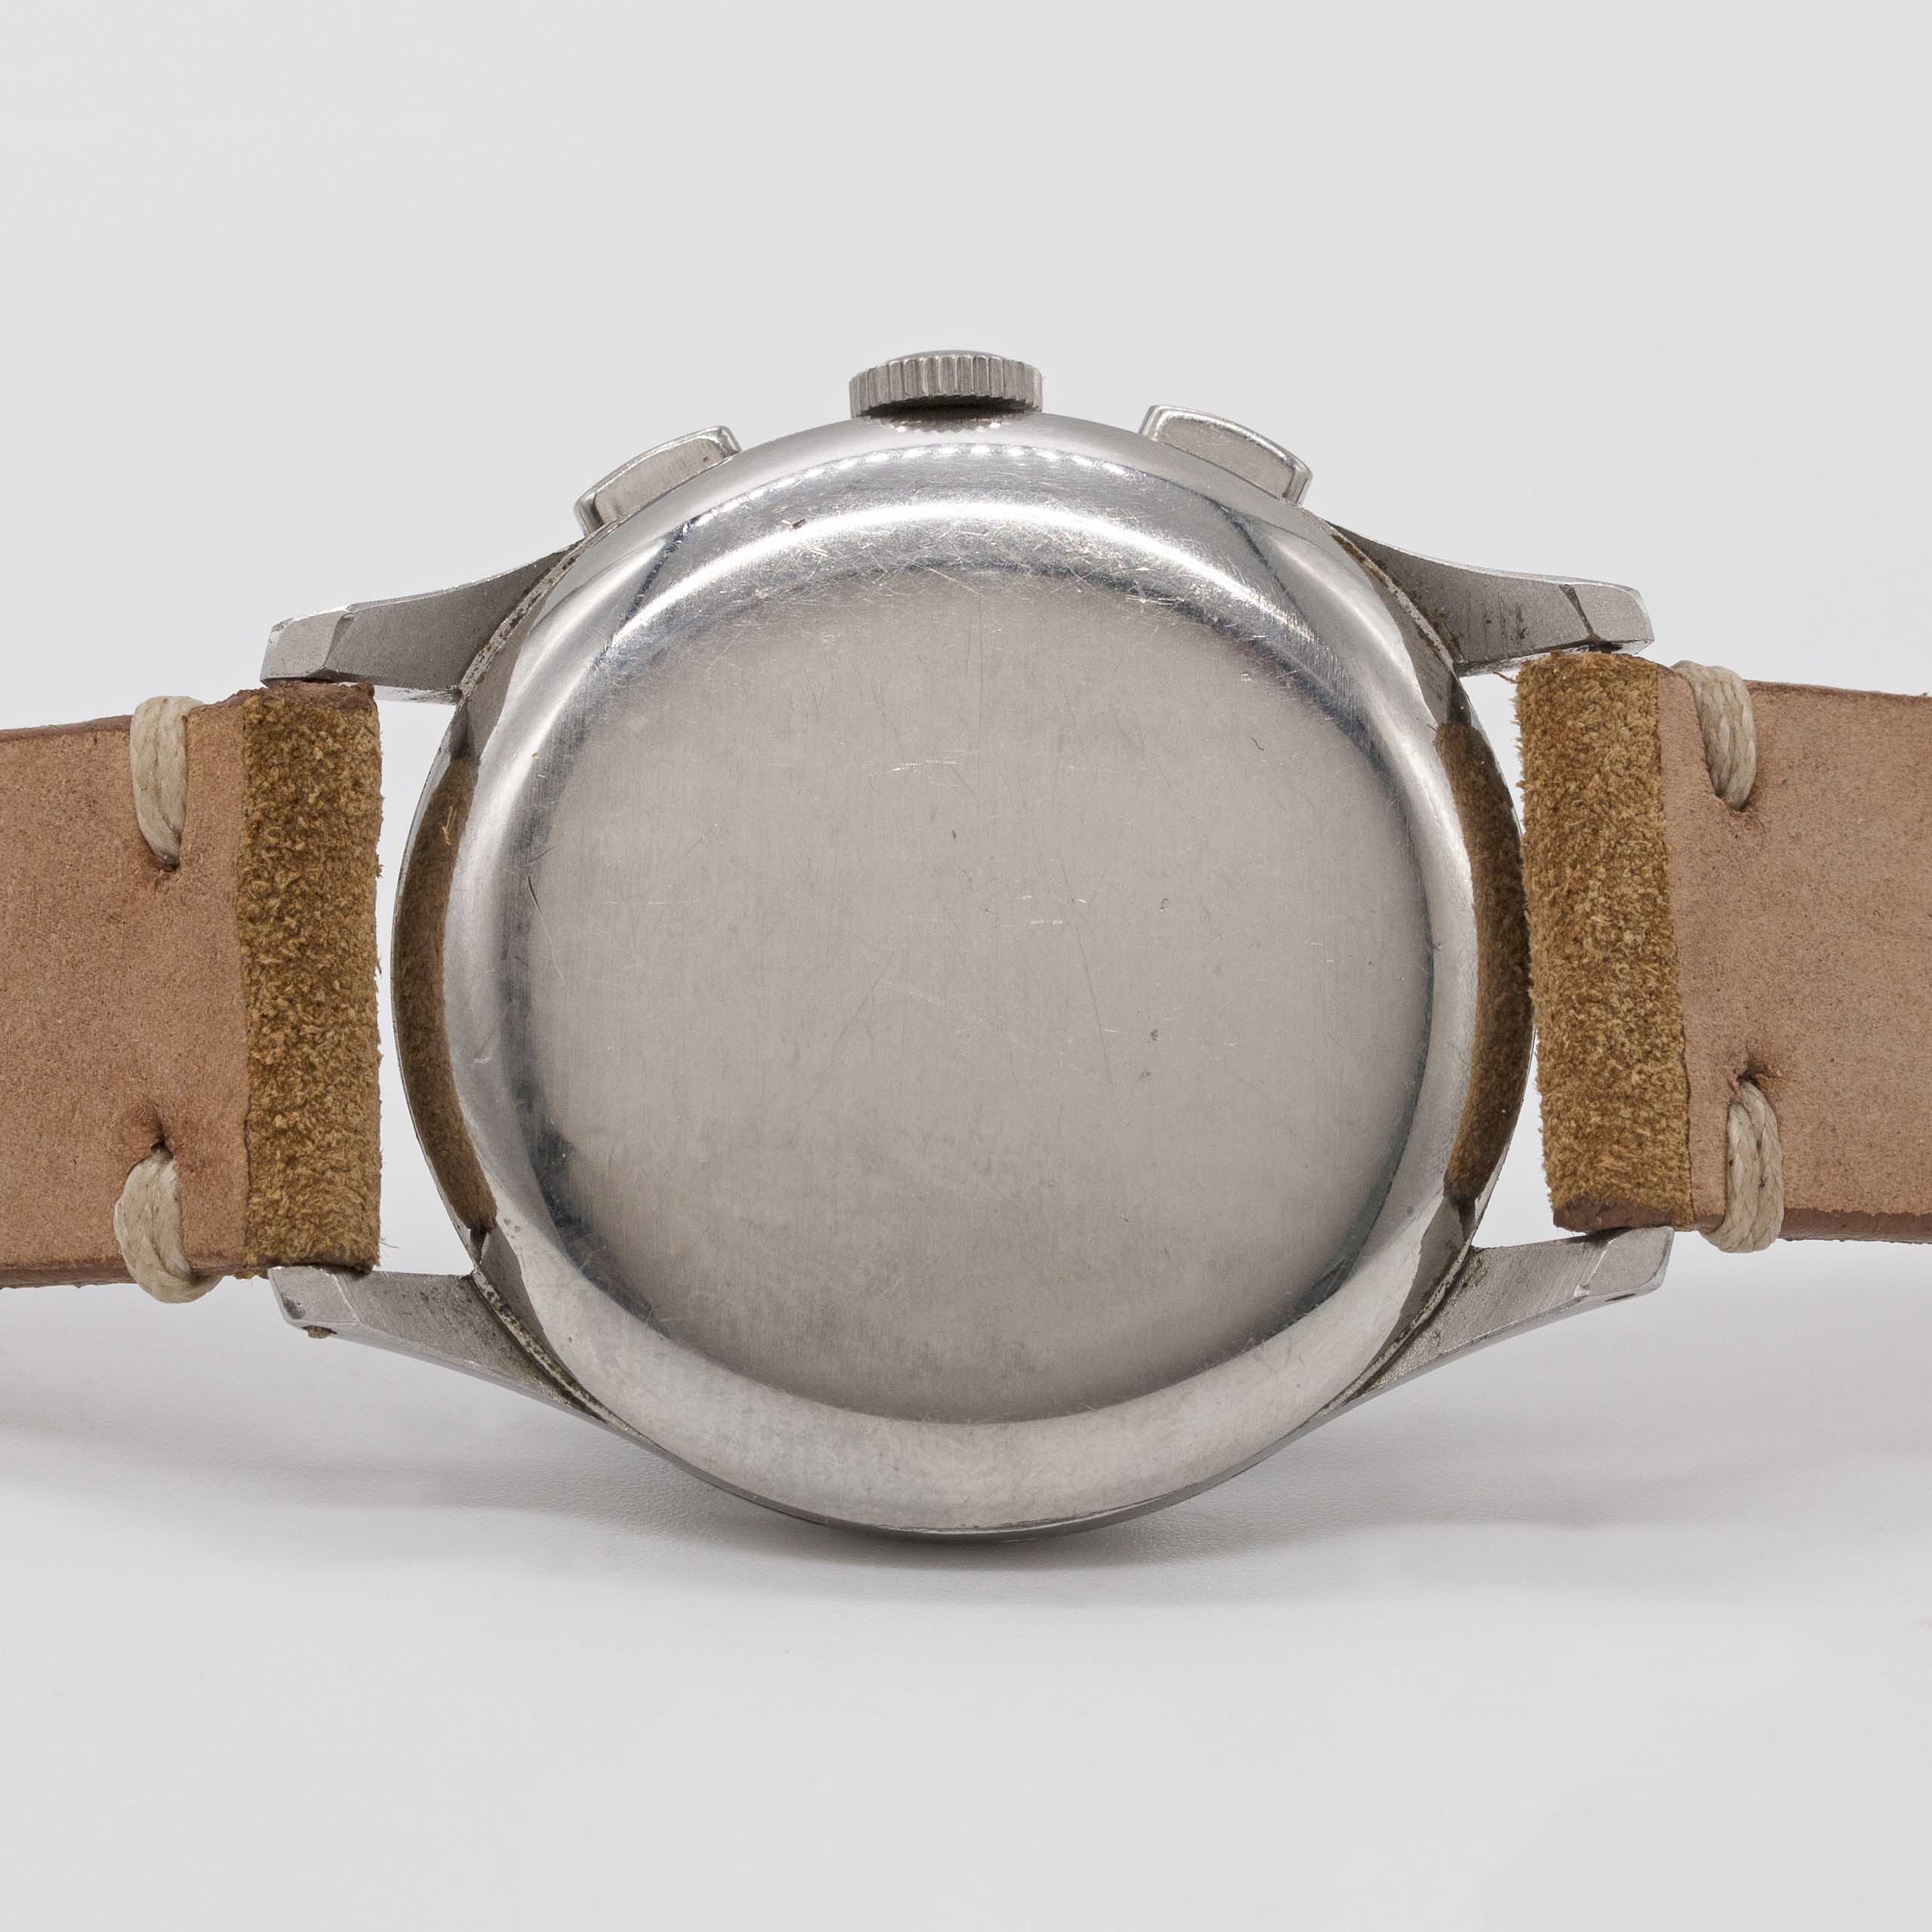 A GENTLEMAN'S STAINLESS STEEL EXCELSIOR PARK CHRONOGRAPH WRIST WATCH CIRCA 1950s, WITH GLOSS - Image 5 of 8